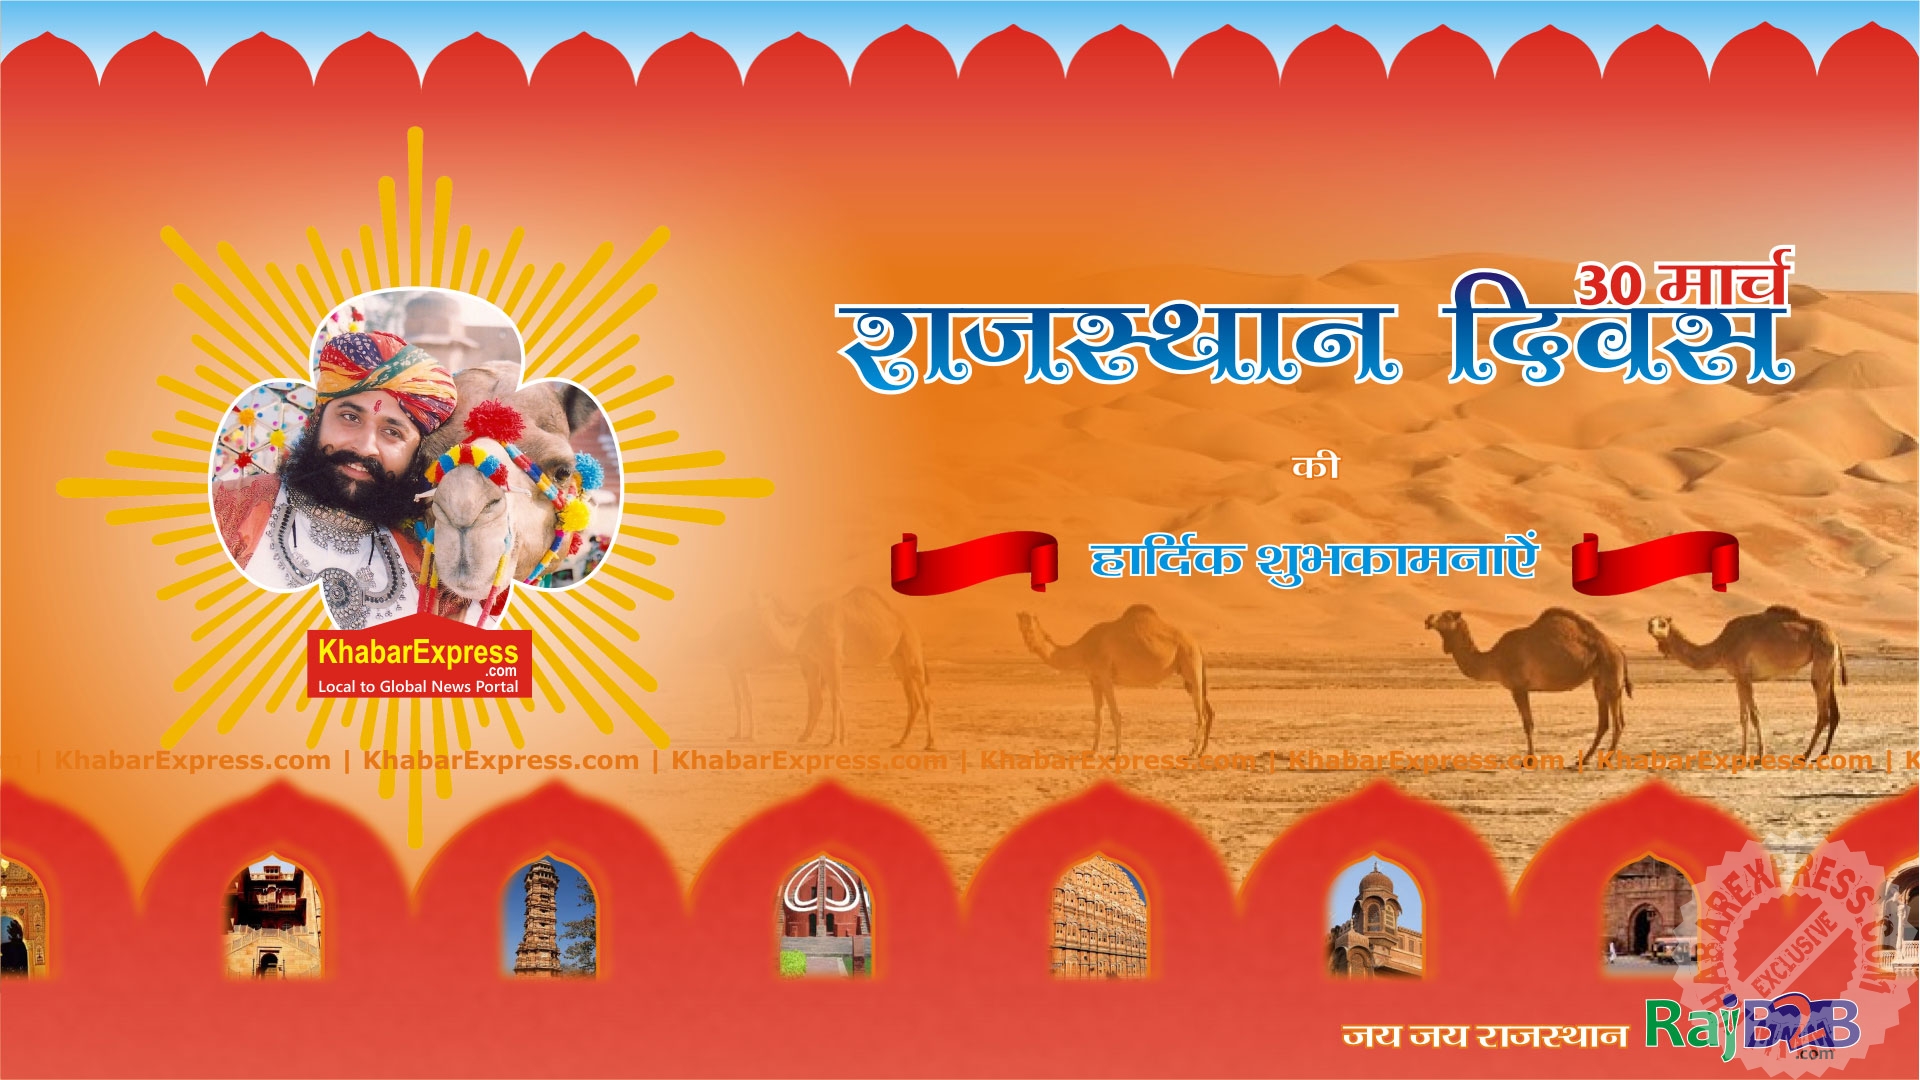 Rajasthan Day 30 March 2018 , HD Wallpaper & Backgrounds